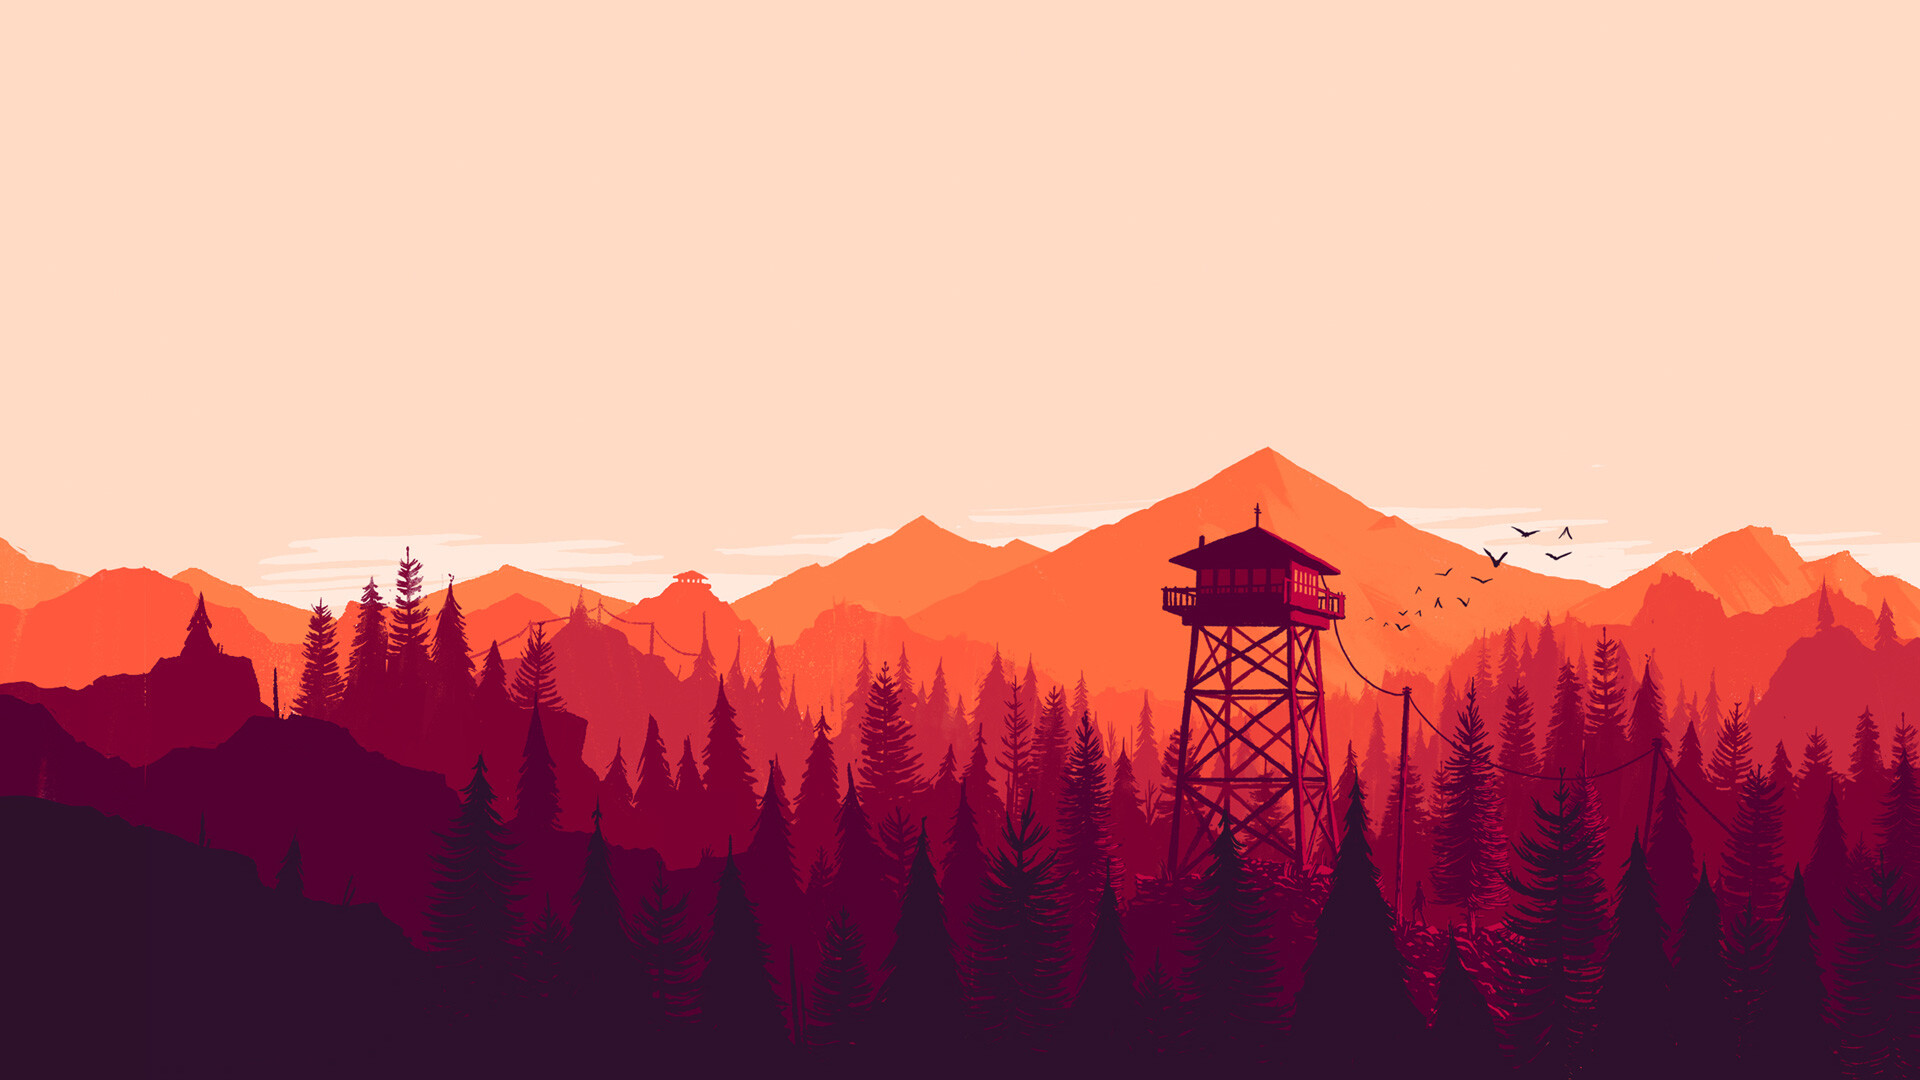 Firewatch: A narrative-driven mystery, The almost-real world of Shoshone National Forest. 1920x1080 Full HD Background.